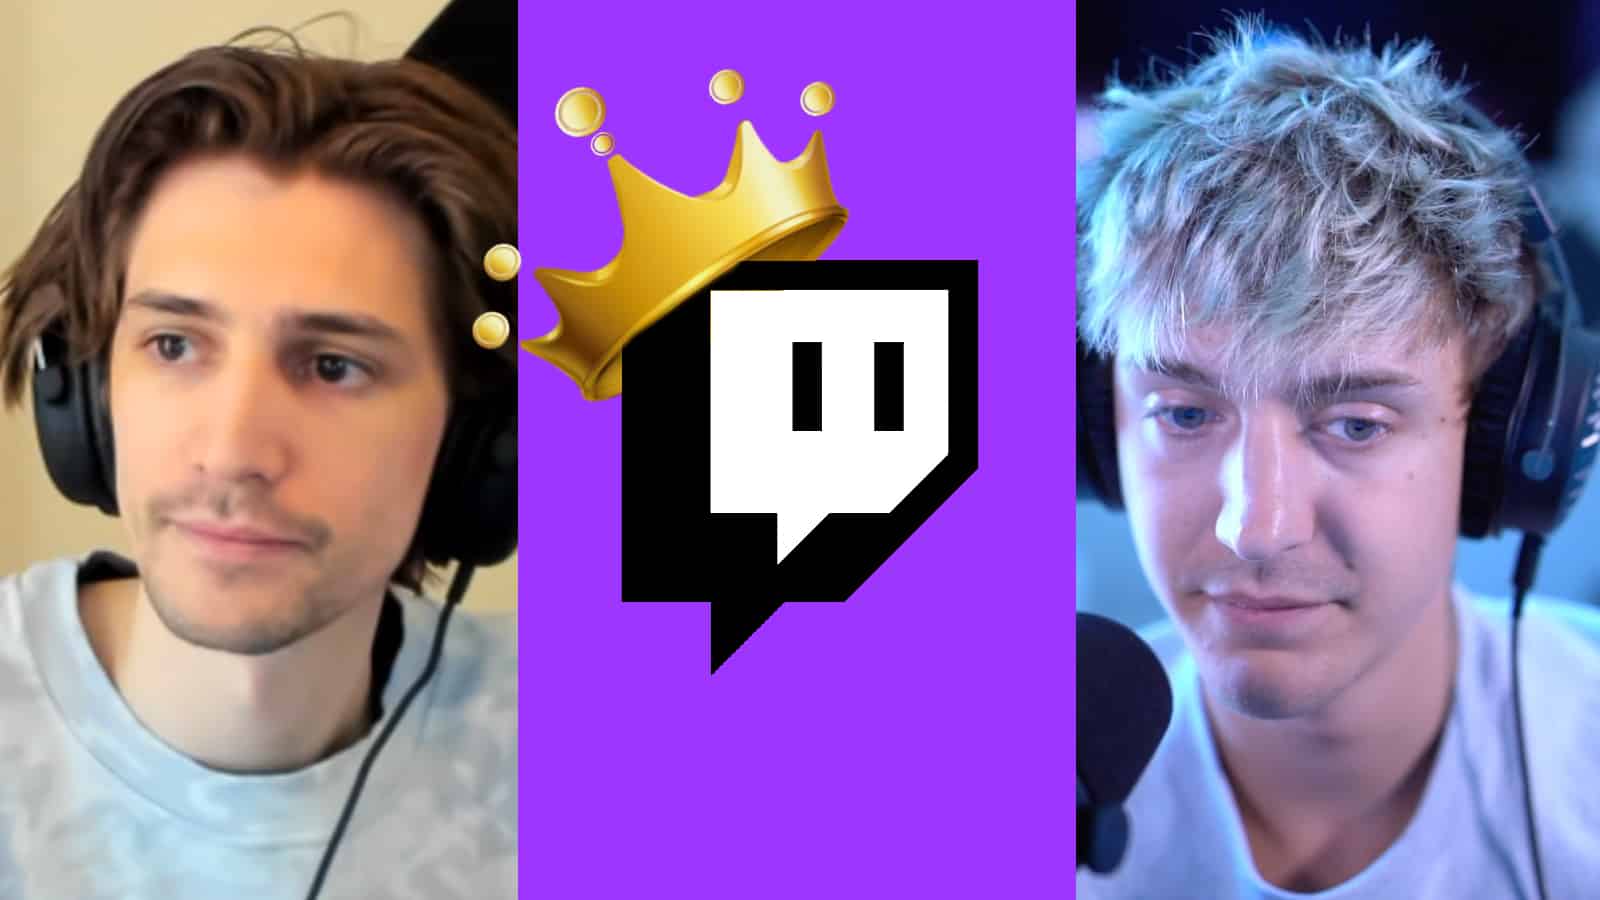 Twitch biggest streamer with ninja and xqc